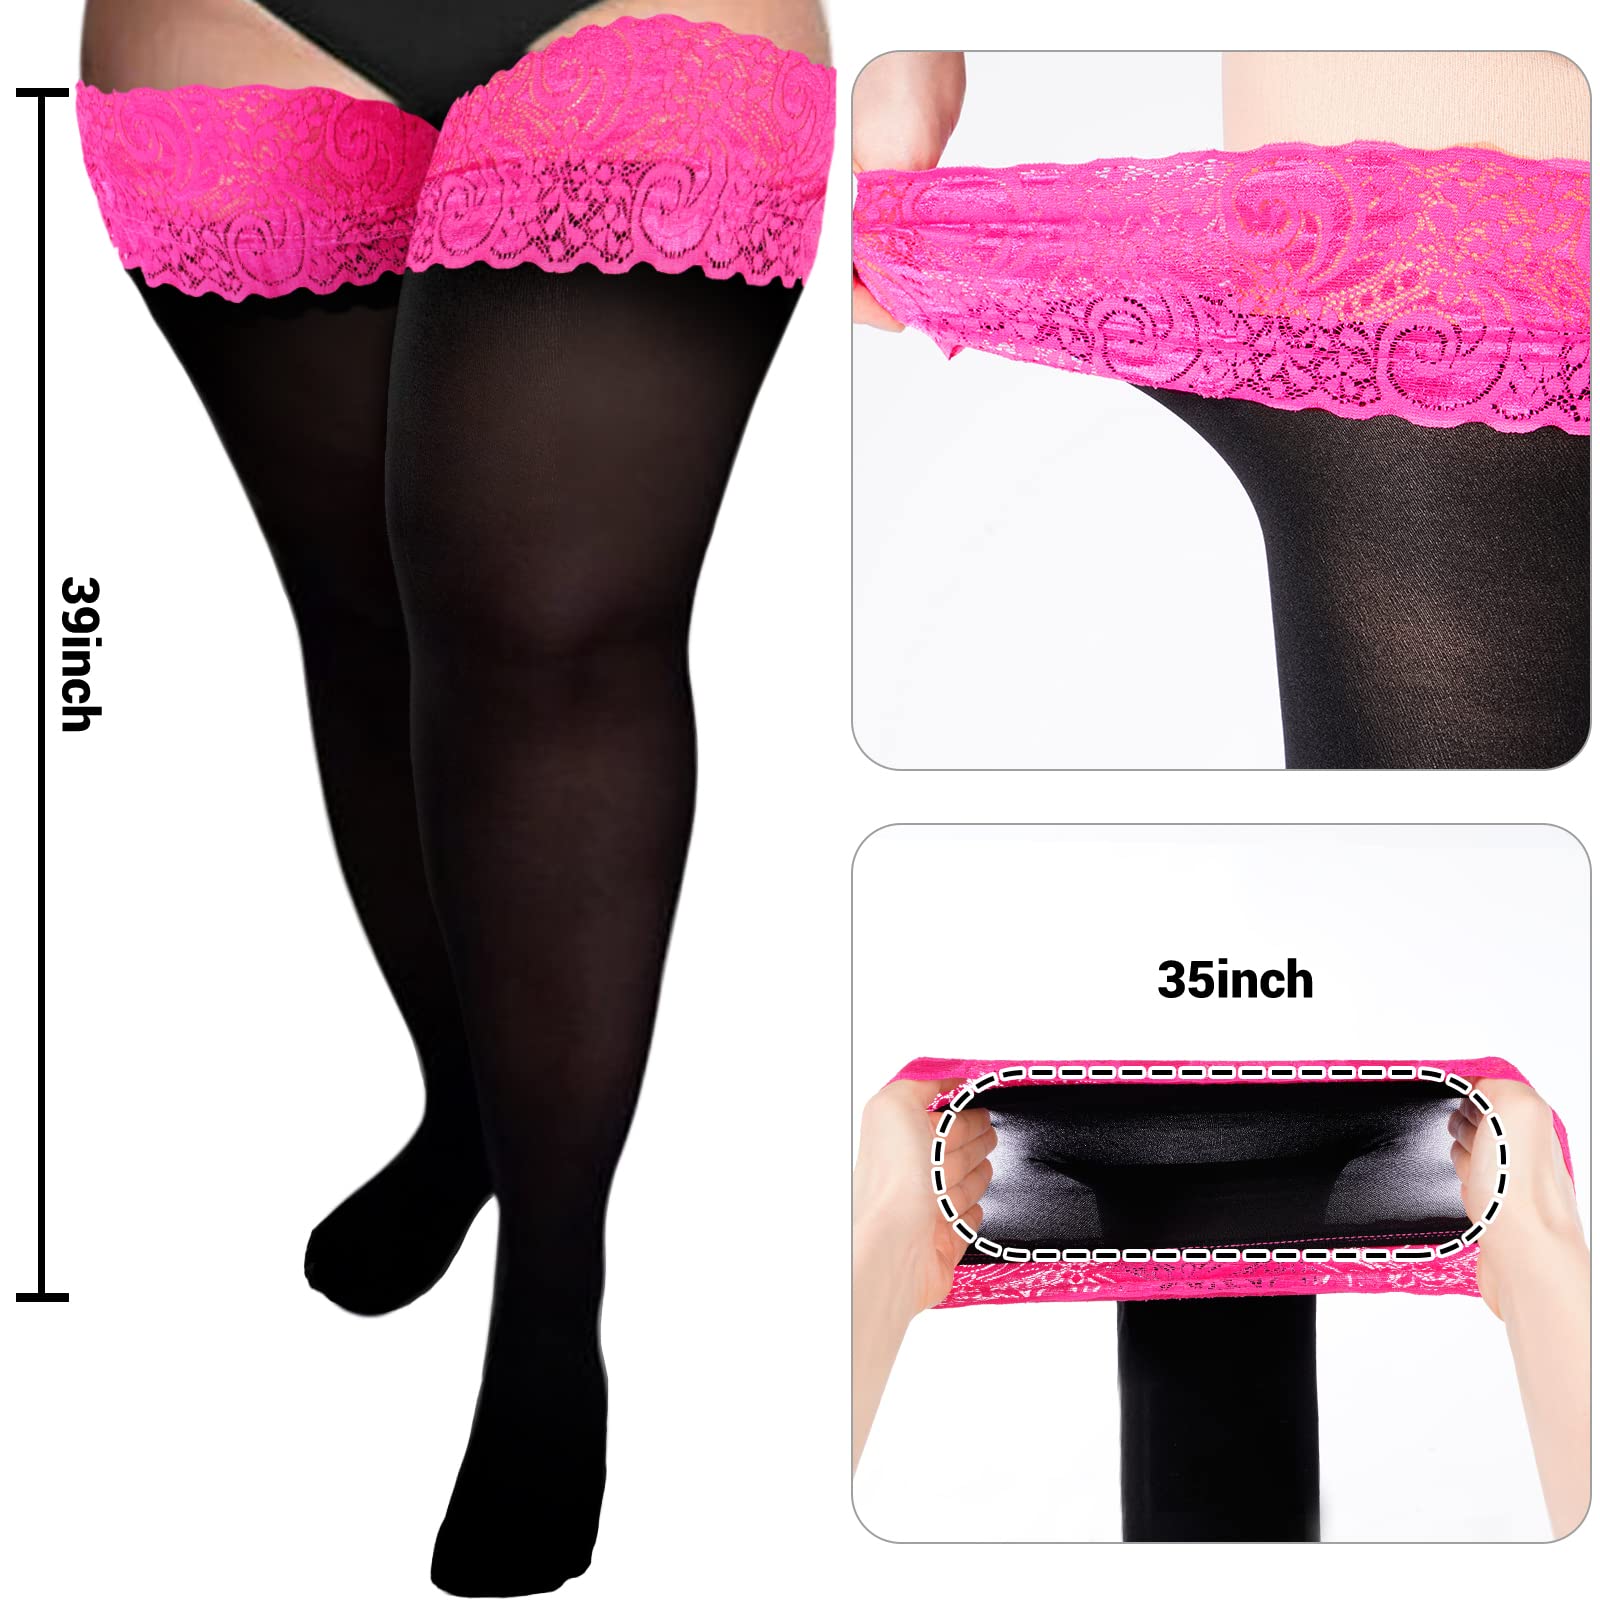 55D Semi Sheer Silicone Lace Stay Up Thigh Highs Pantyhose-Black & Purple Lace - Moon Wood